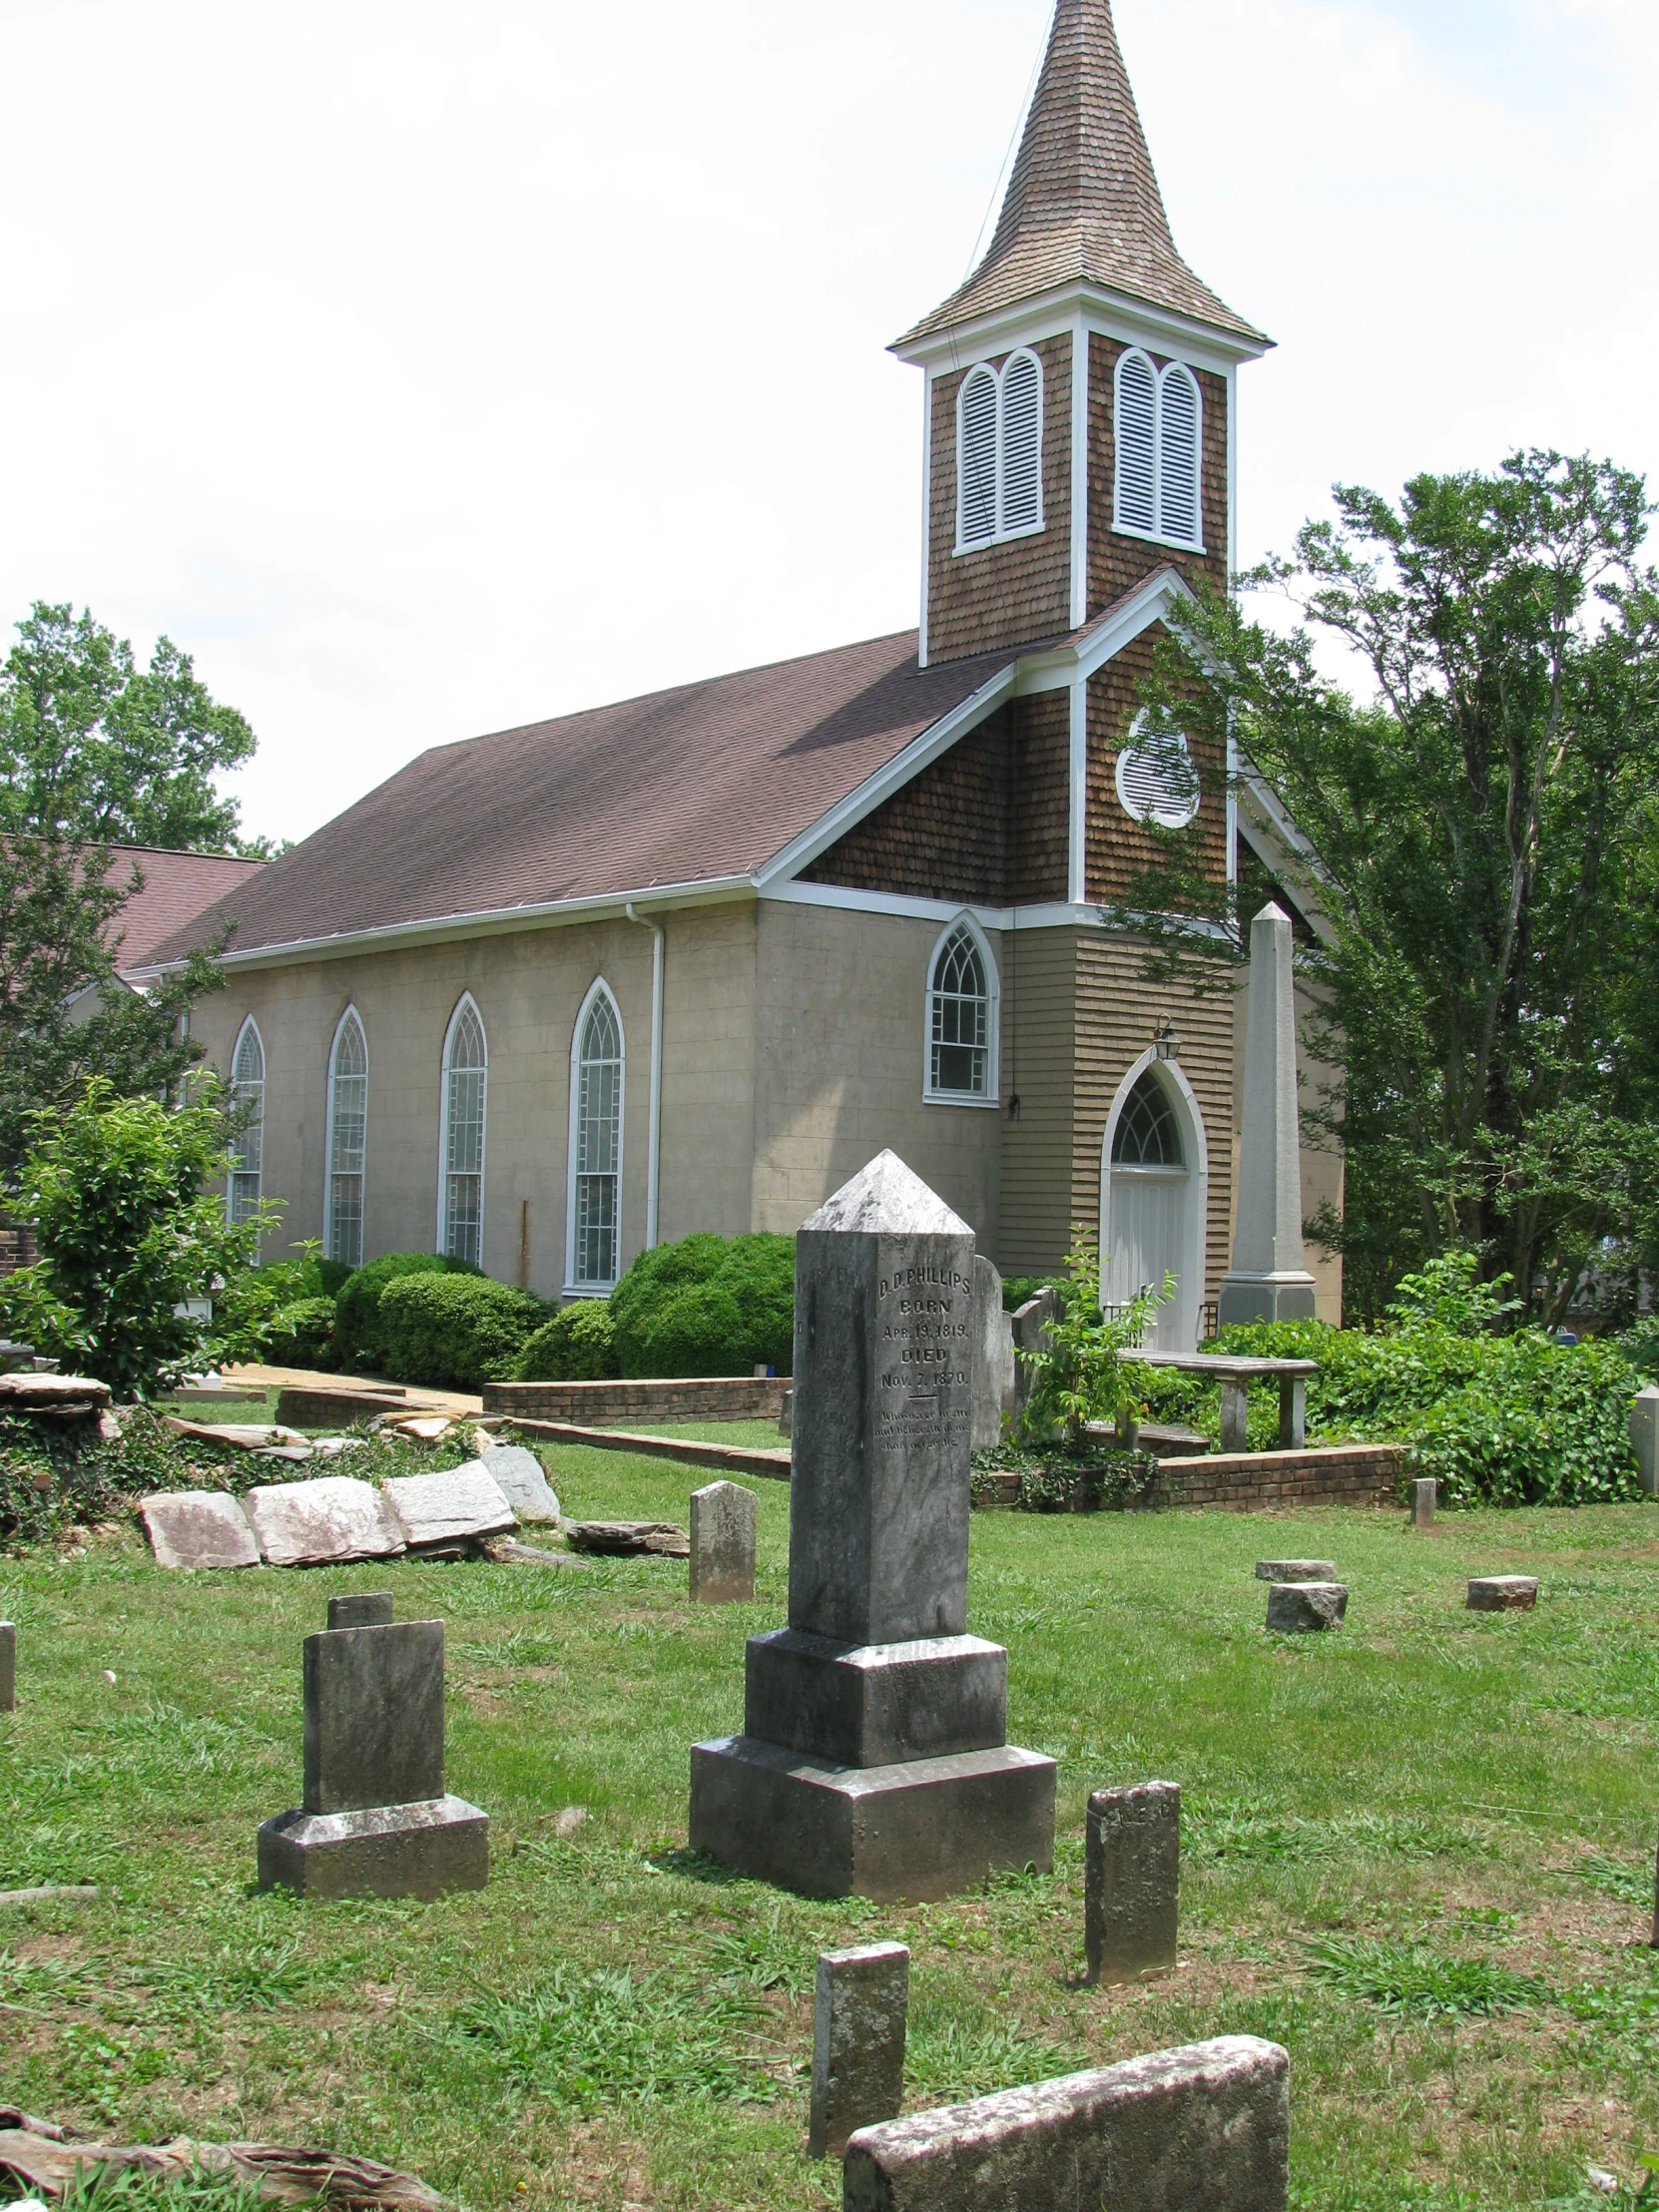 an old stone church building with a steeple